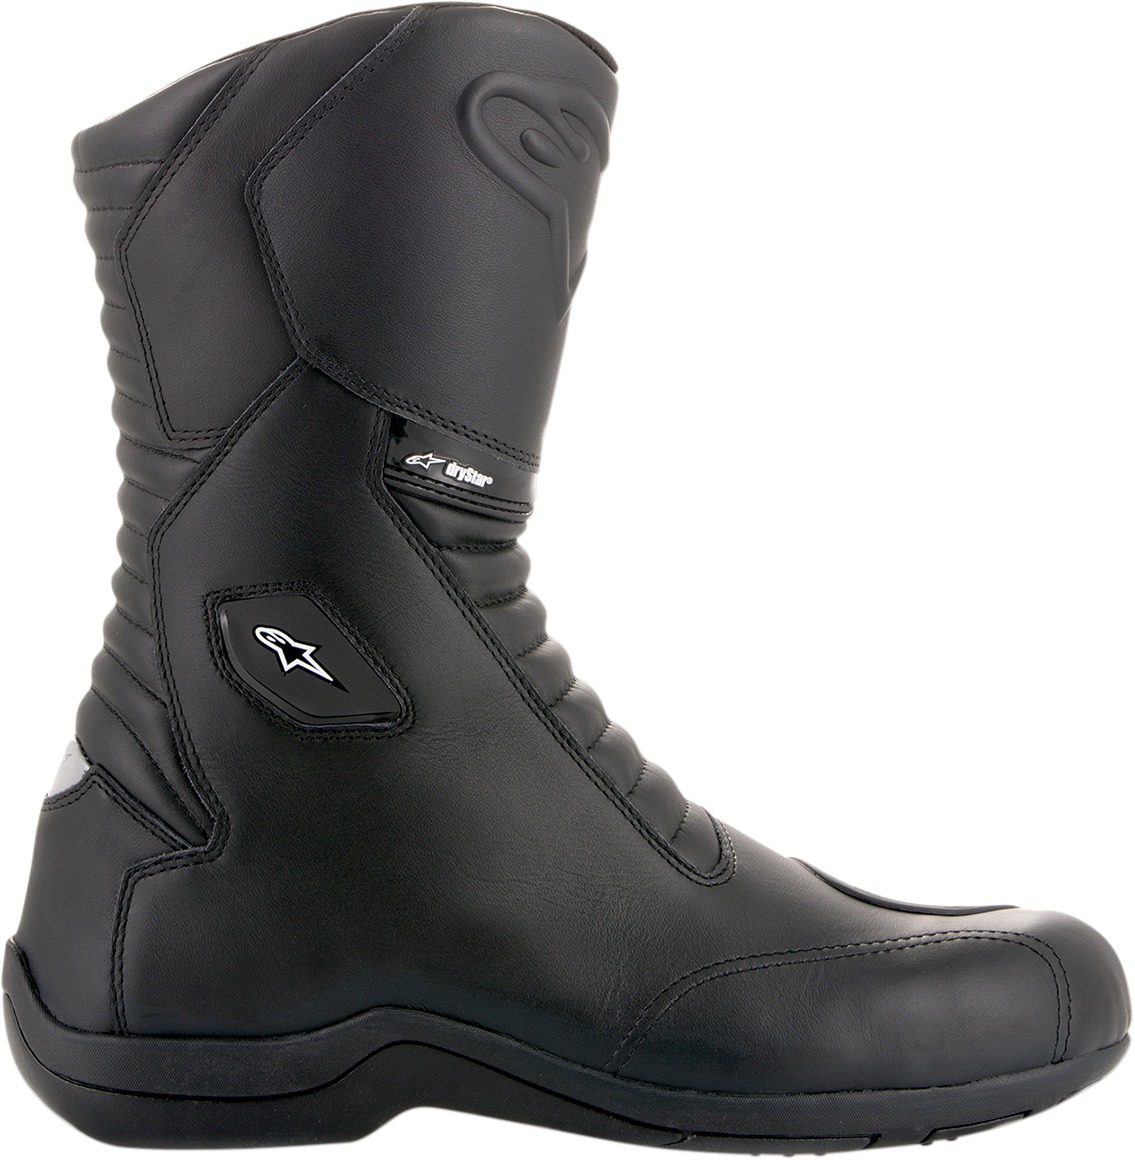 Andes V2 Drystar Street Riding Boots Black US 10.5 - Click Image to Close